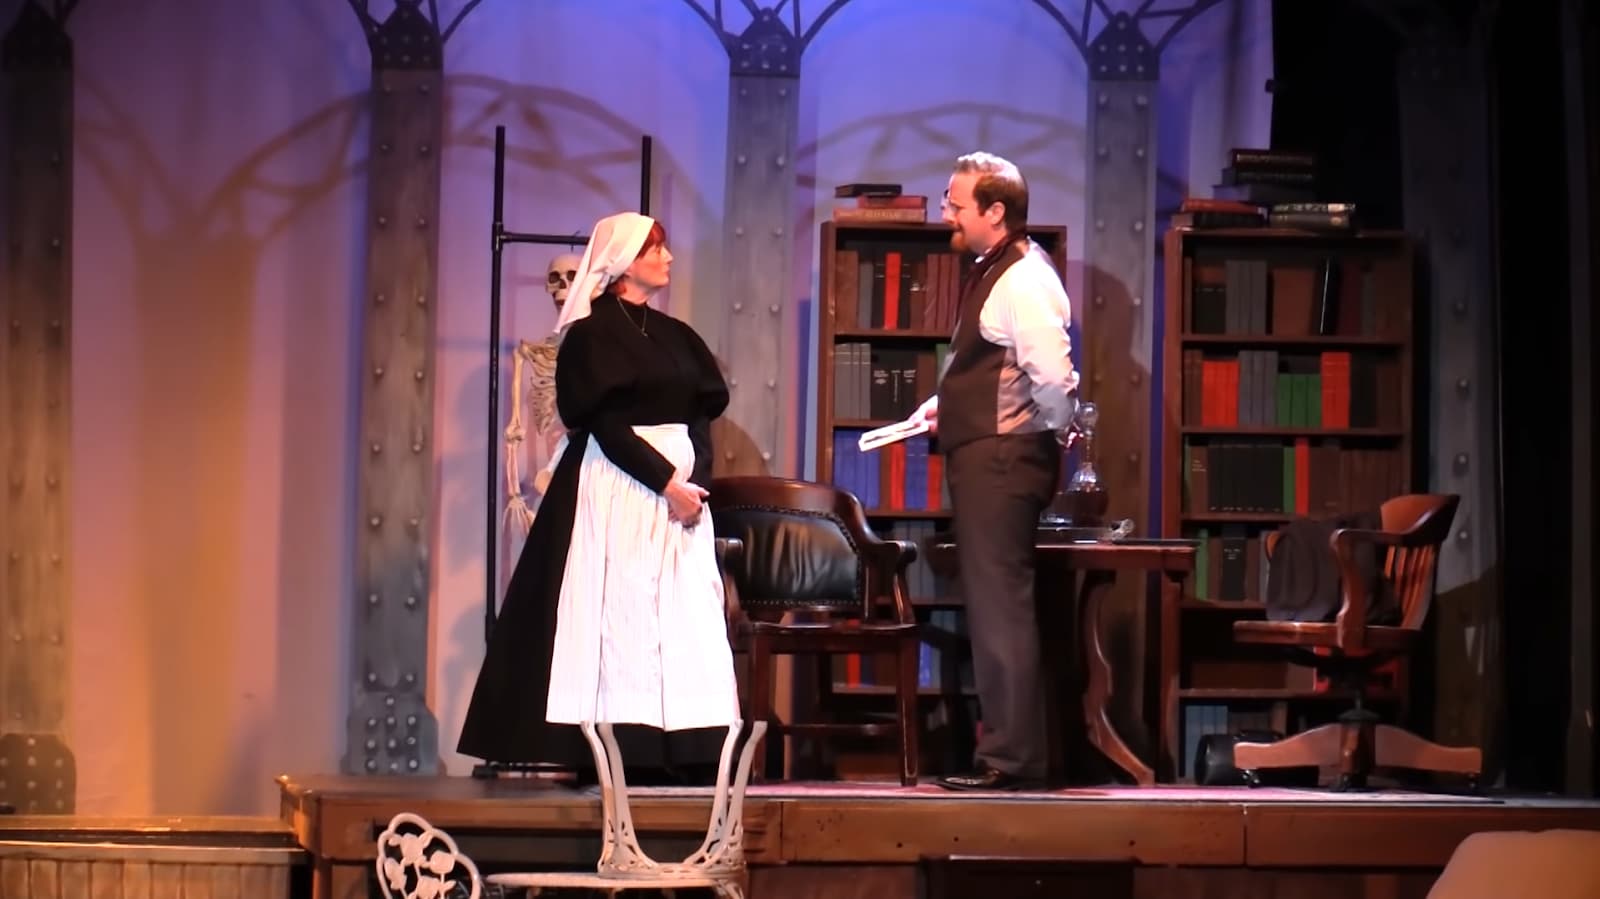 A staged scene with a woman in maid attire and a man with papers